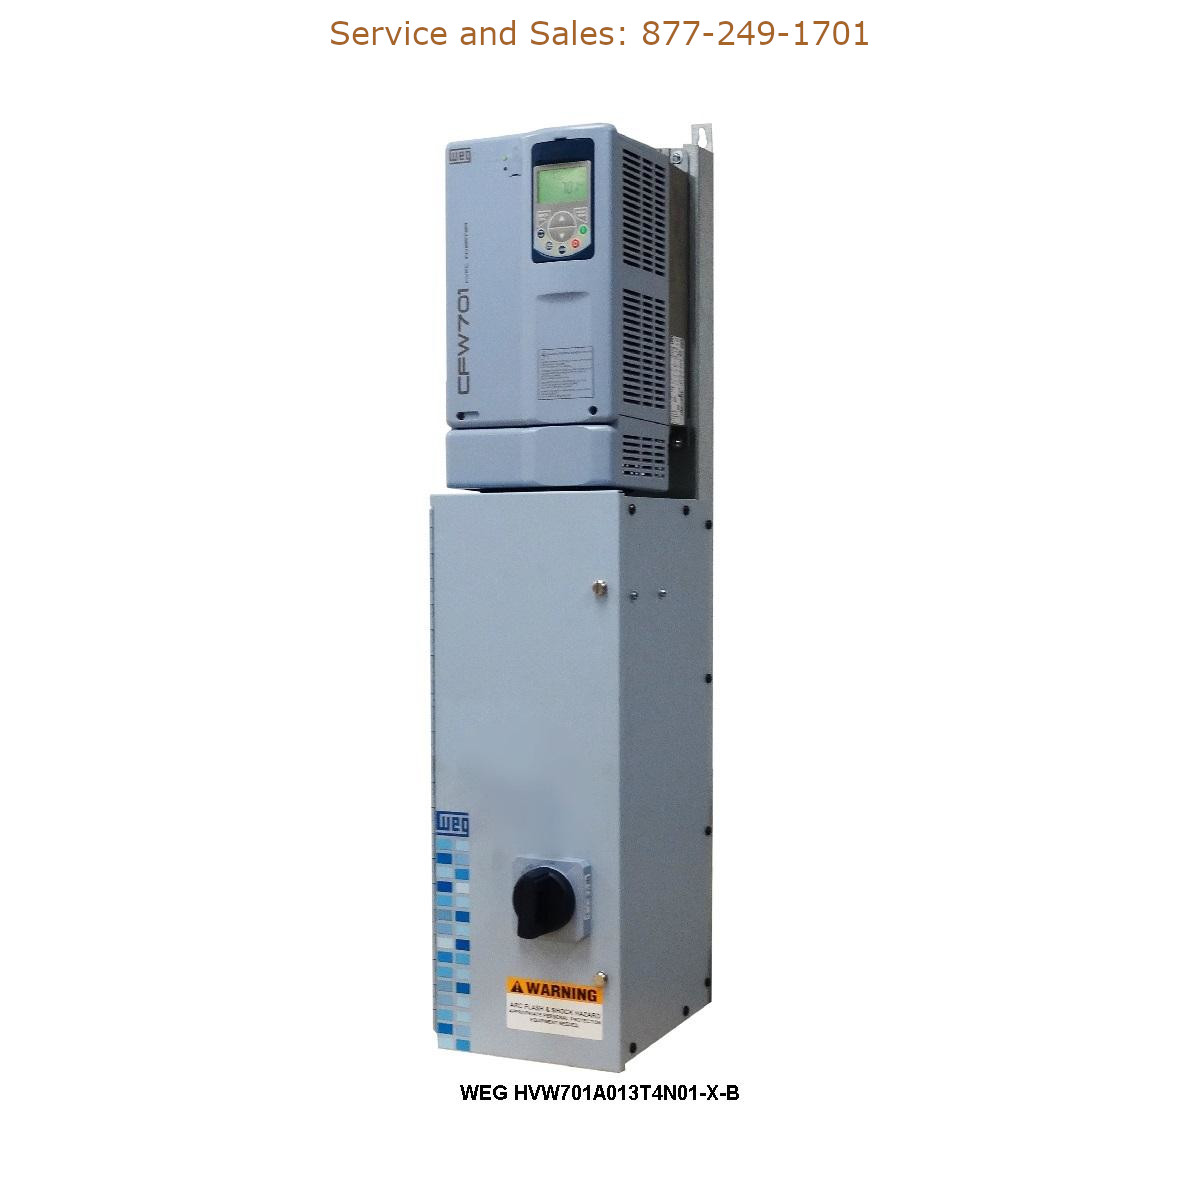 WEG HVW701A013T4N01-X-B WEG Model Number HVW701A013T4N01-X-B WEG Drives, Variable Speed Drives Repair Service, Troubleshooting, Replacement Parts https://gesrepair.com/wp-content/uploads/2022/WEG/WEG_HVW701A013T4N01-X-B_Drives_Variable_Speed_Drives.jpg